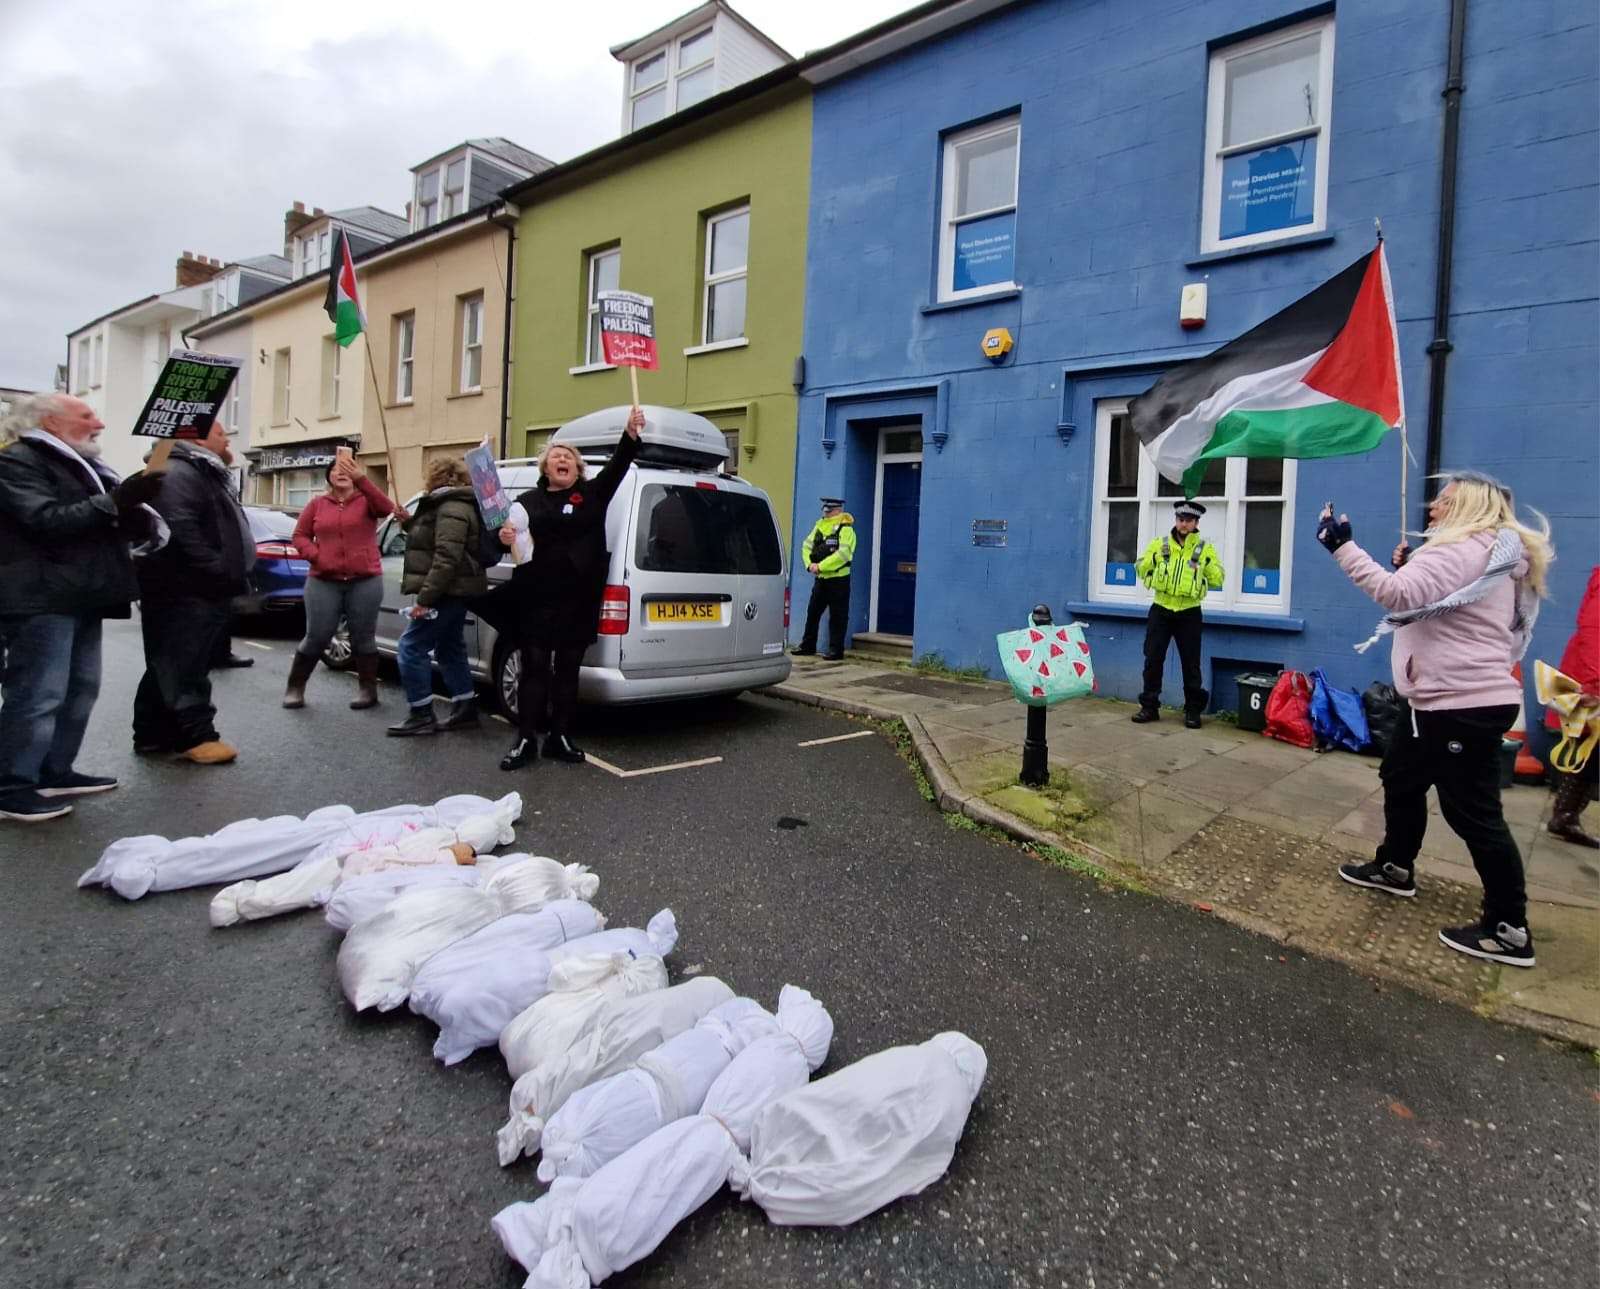 Pro-Palestine protesters lay shrouded ‘dead bodies’ at the Office of Conservative MP Stephen Crabb